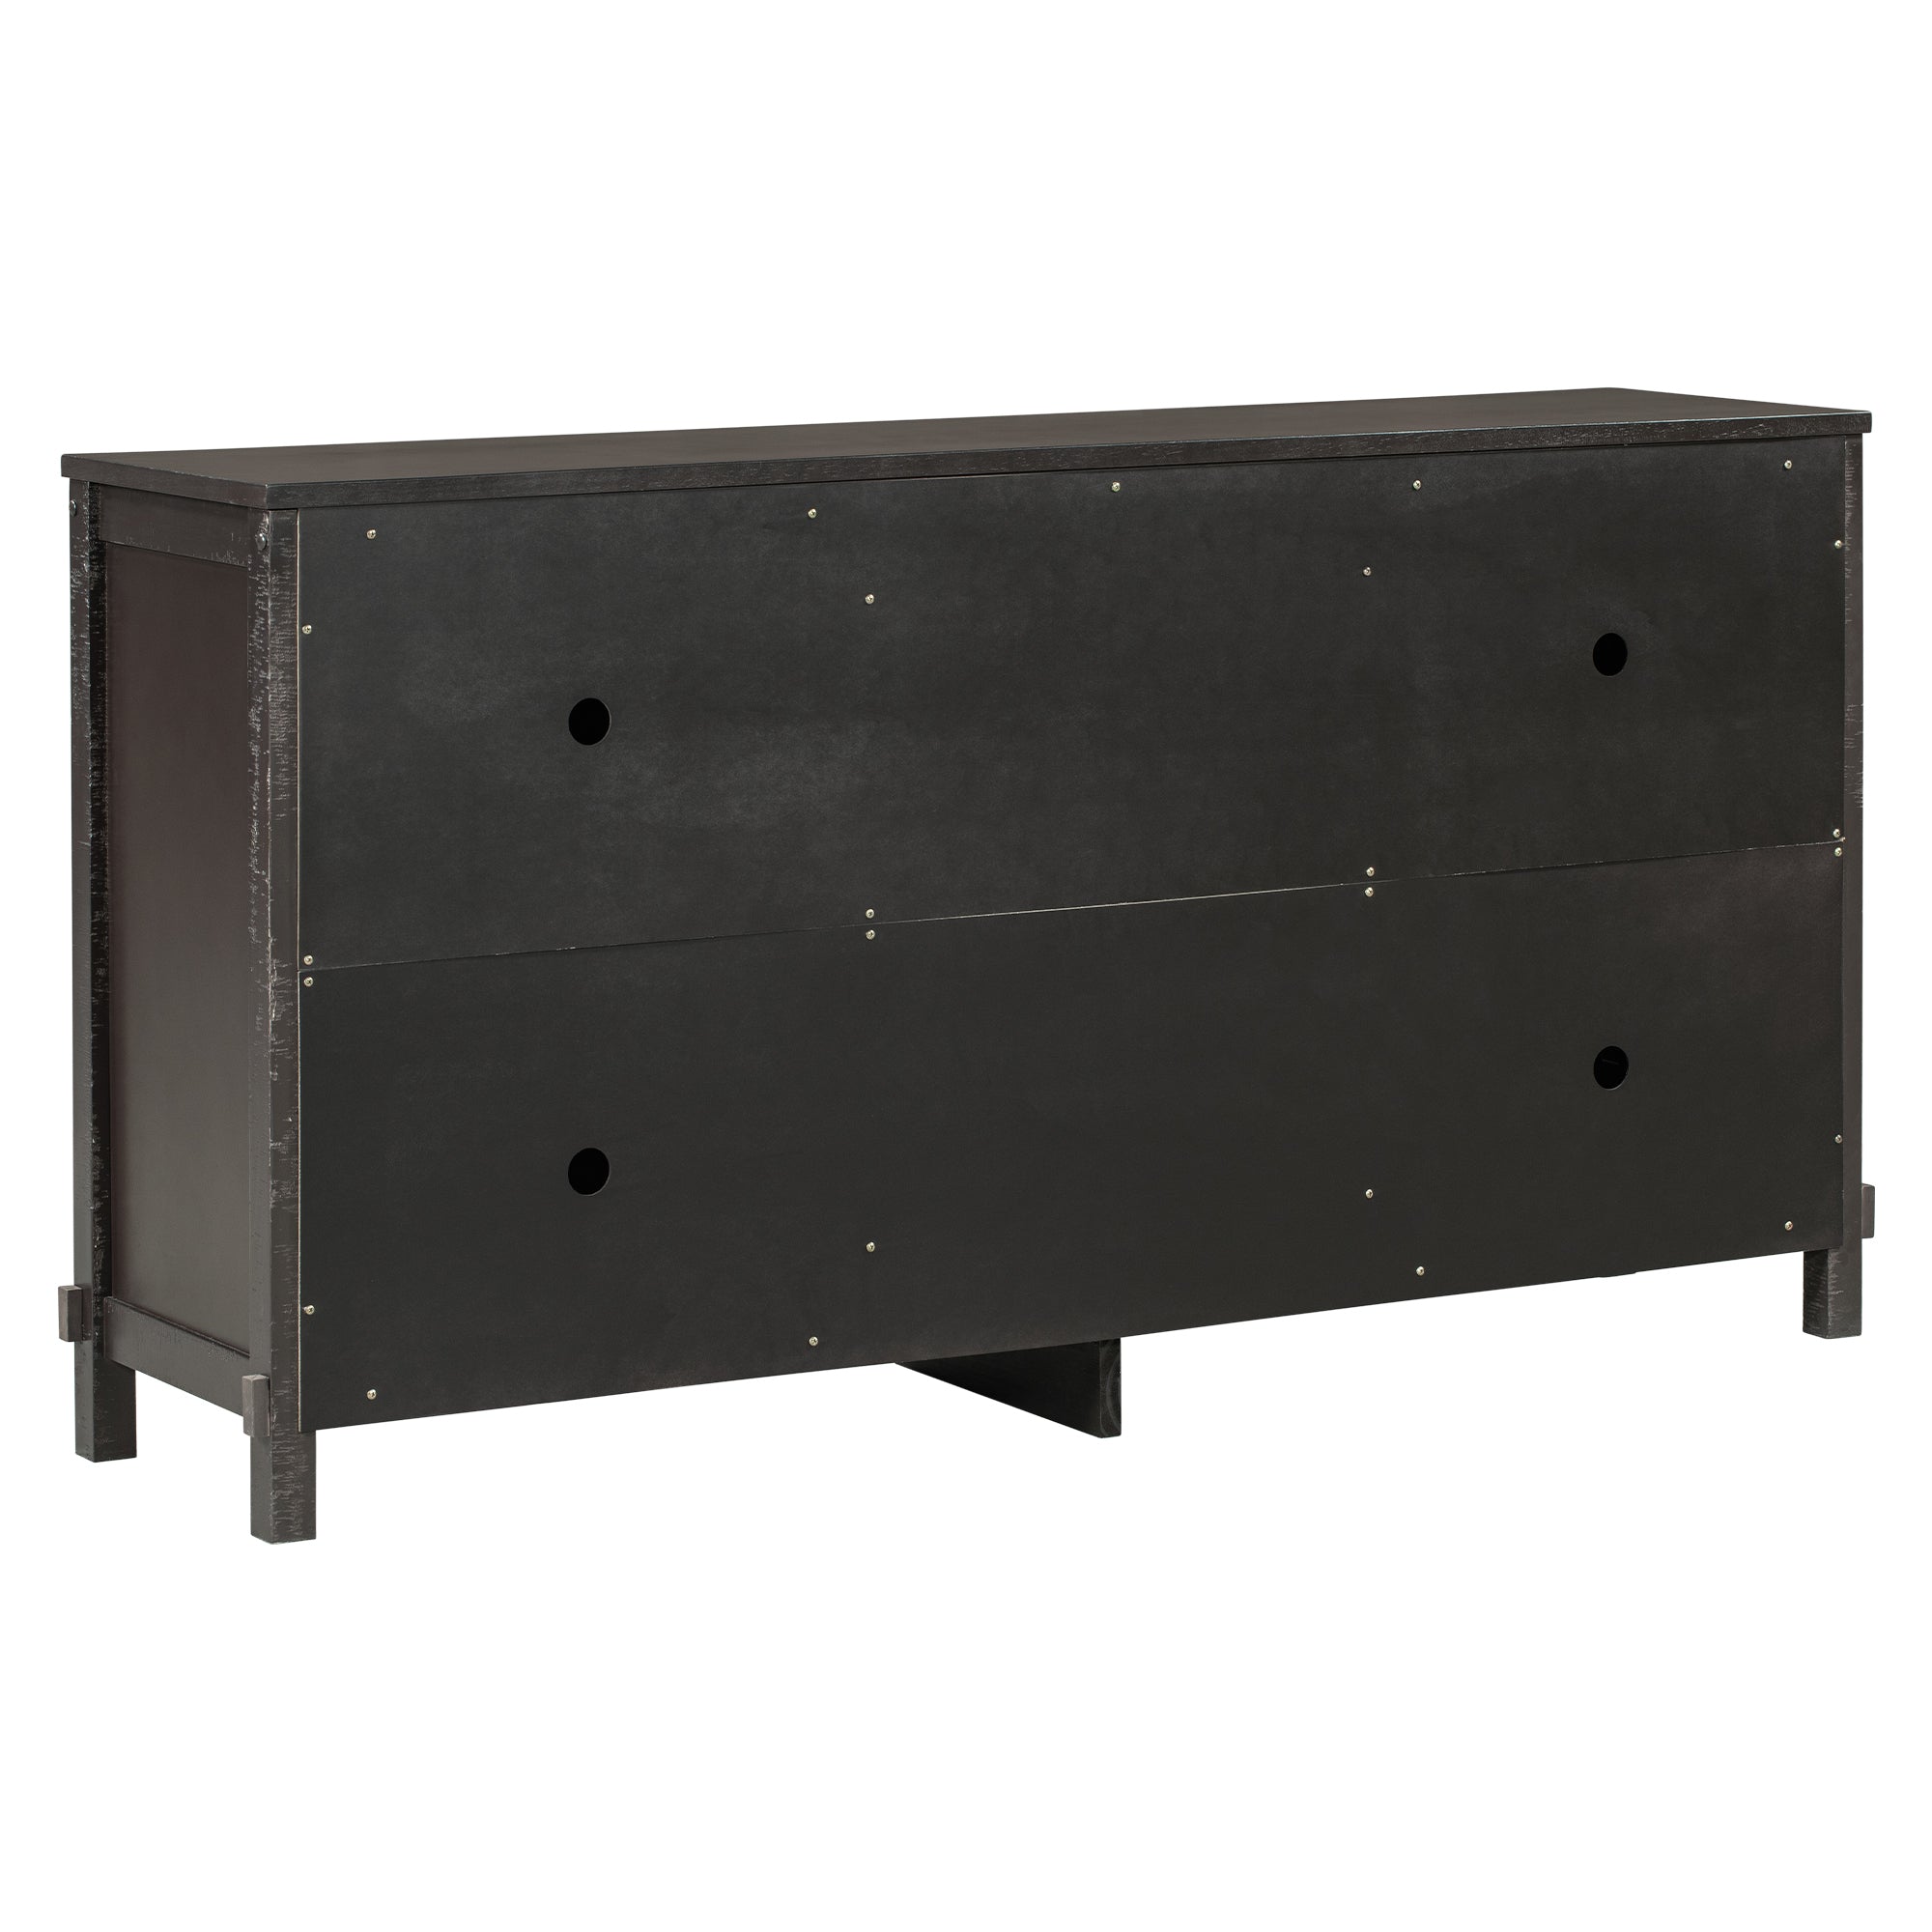 Retro Solid Wood Buffet Cabinet with 2 Storage espresso-solid wood